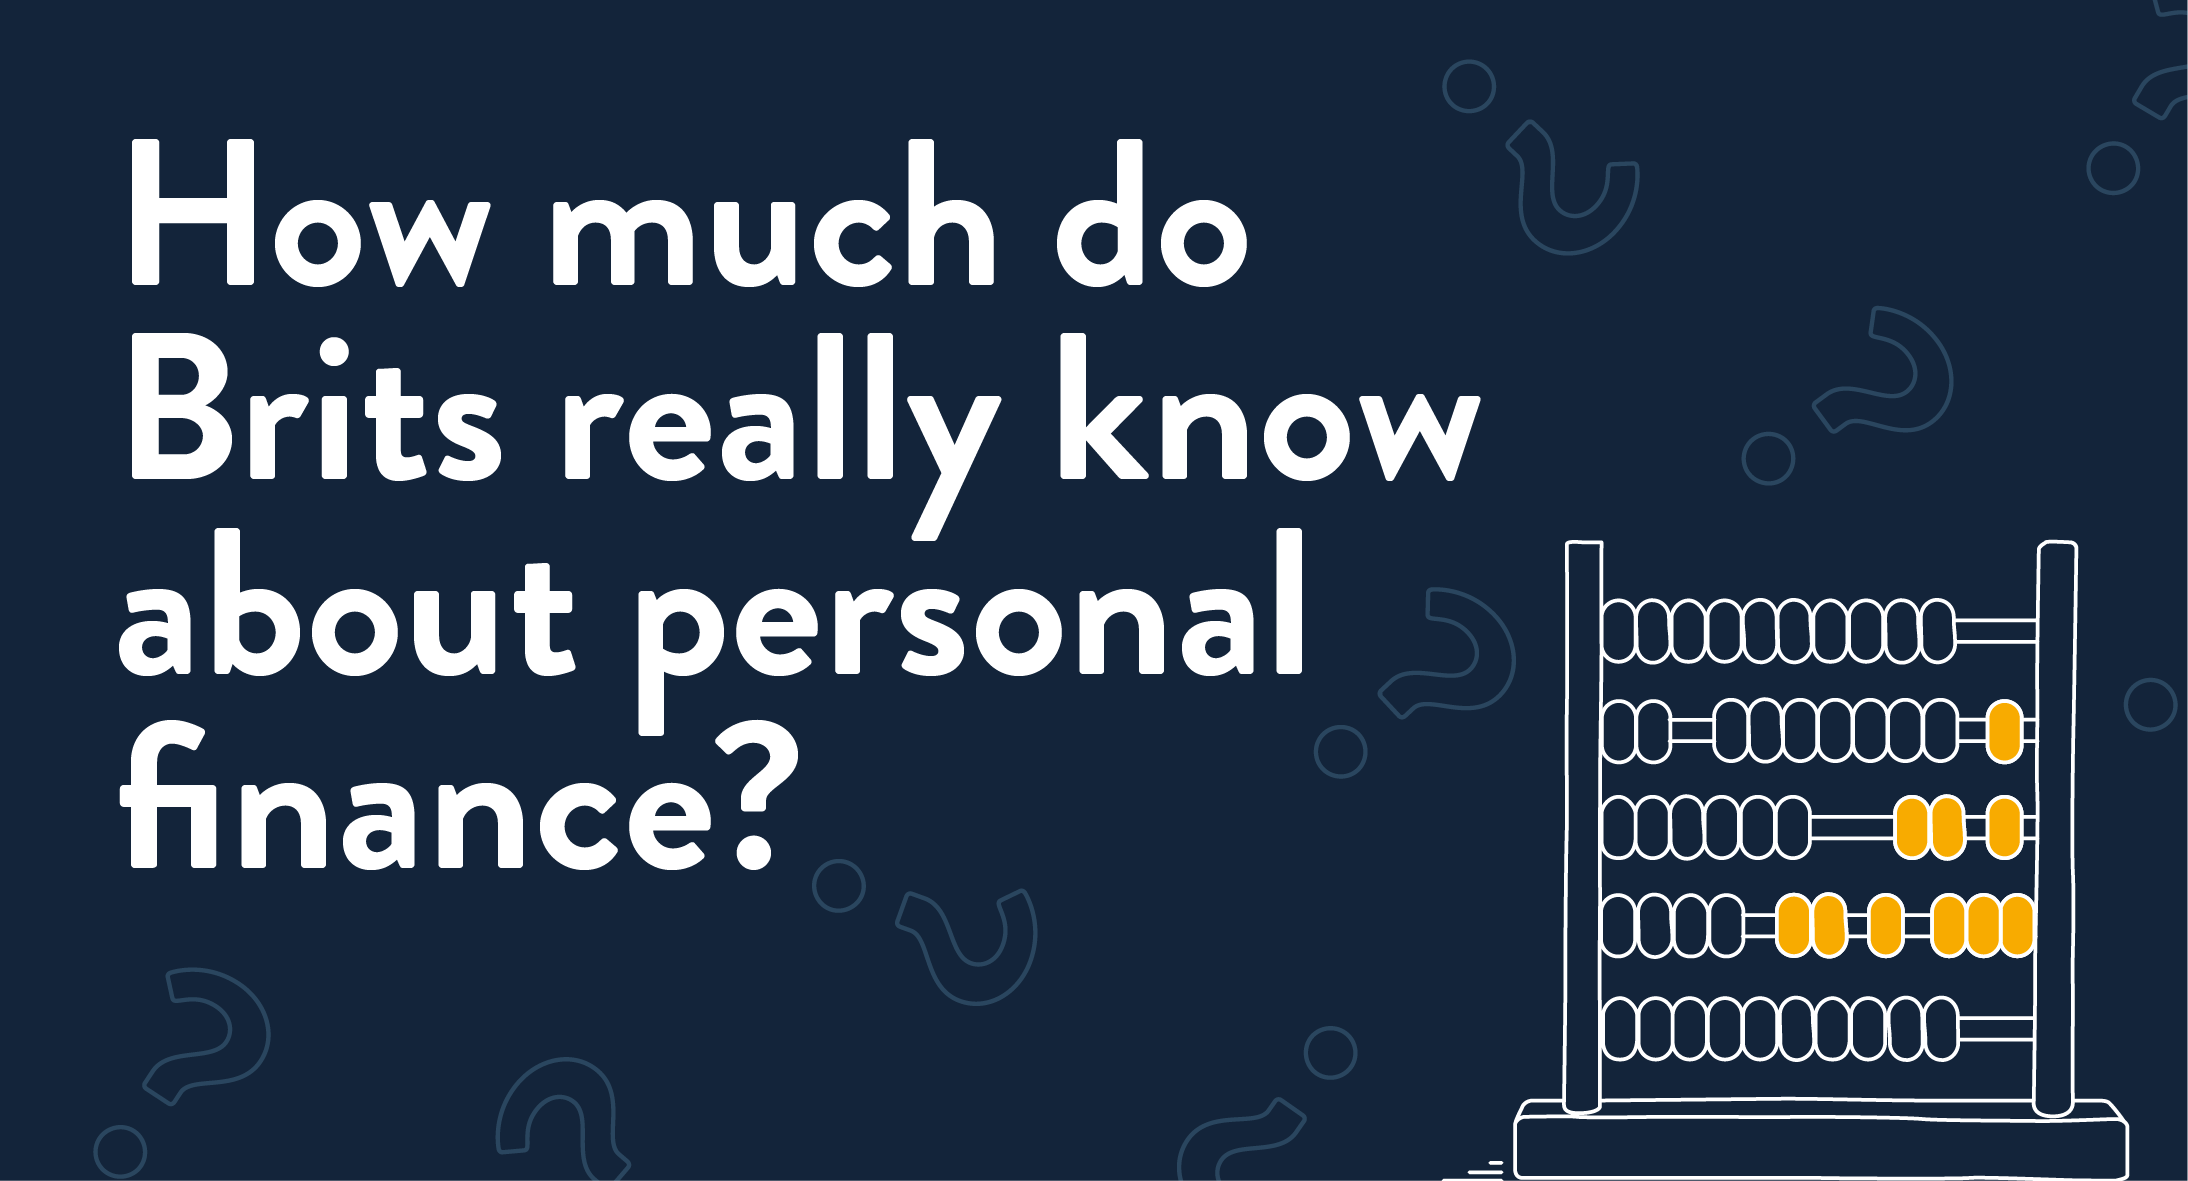 Title graphic with abacus: How much do Brits really know about personal finance?